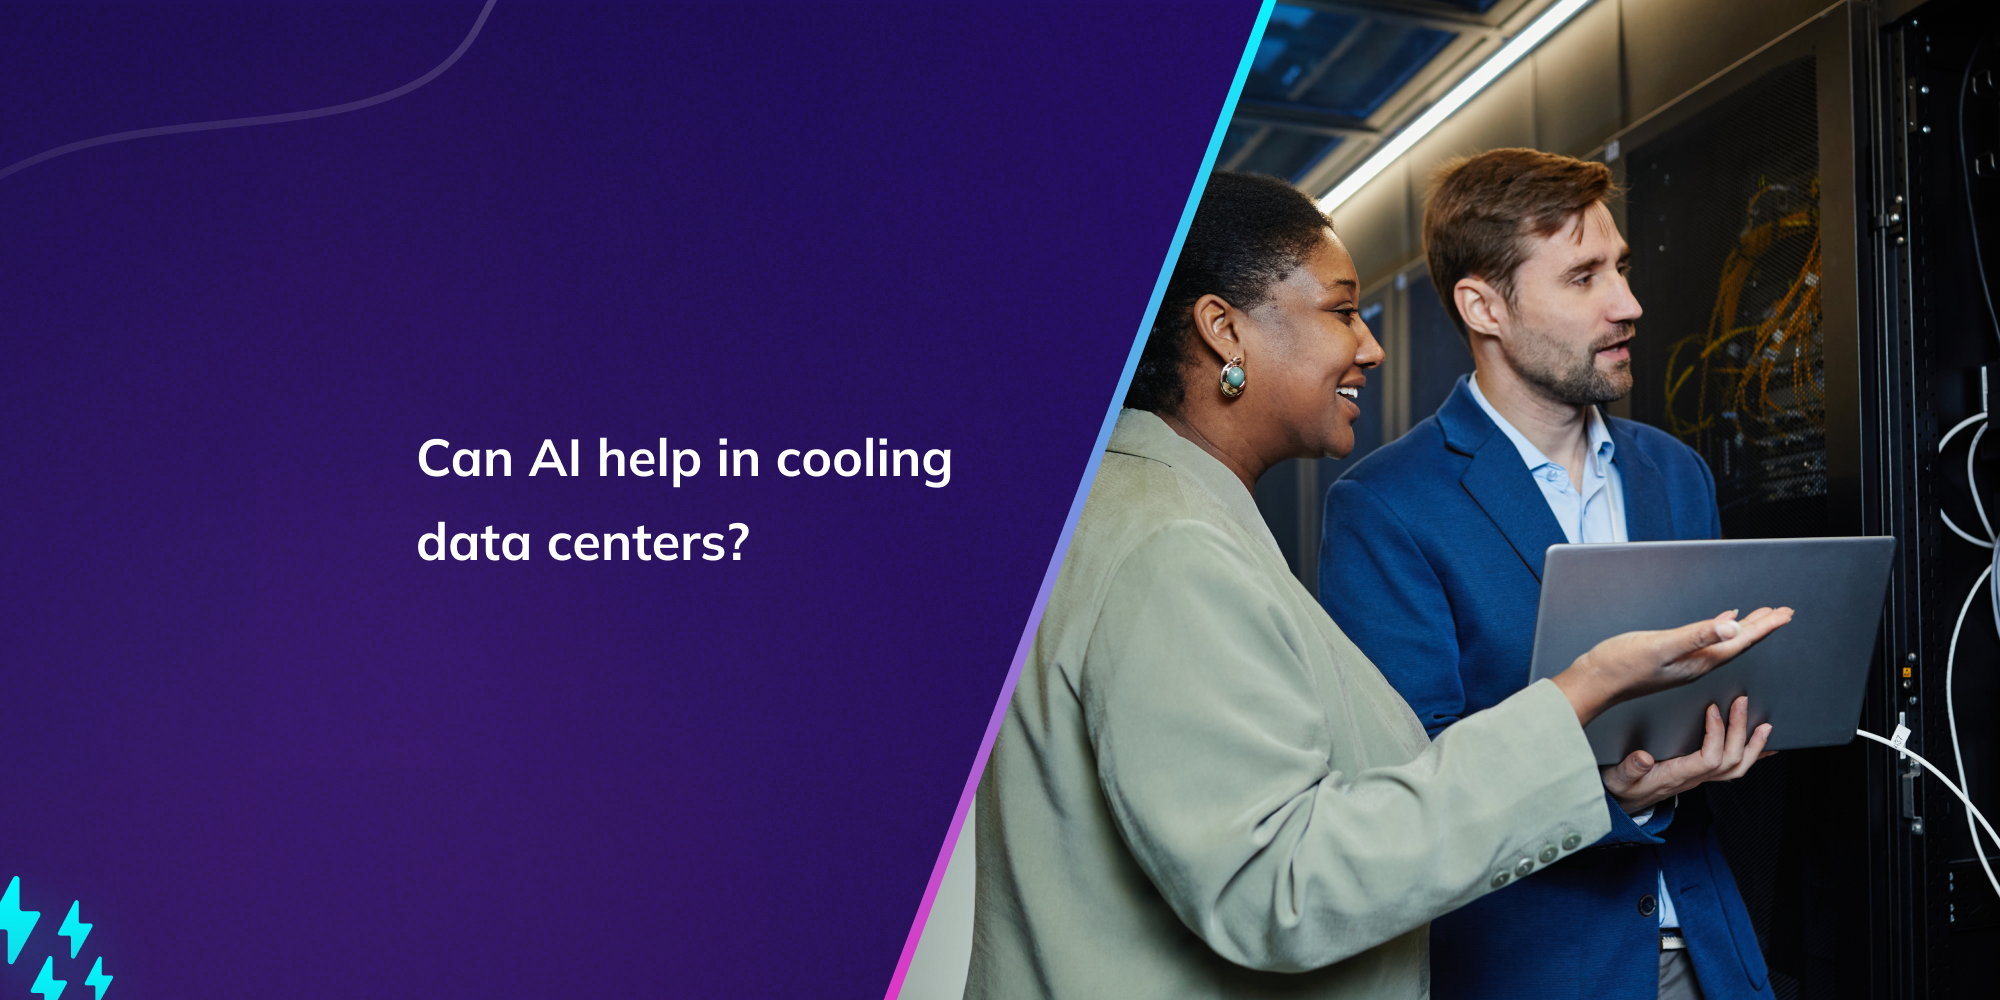 Can AI help in cooling data centers?